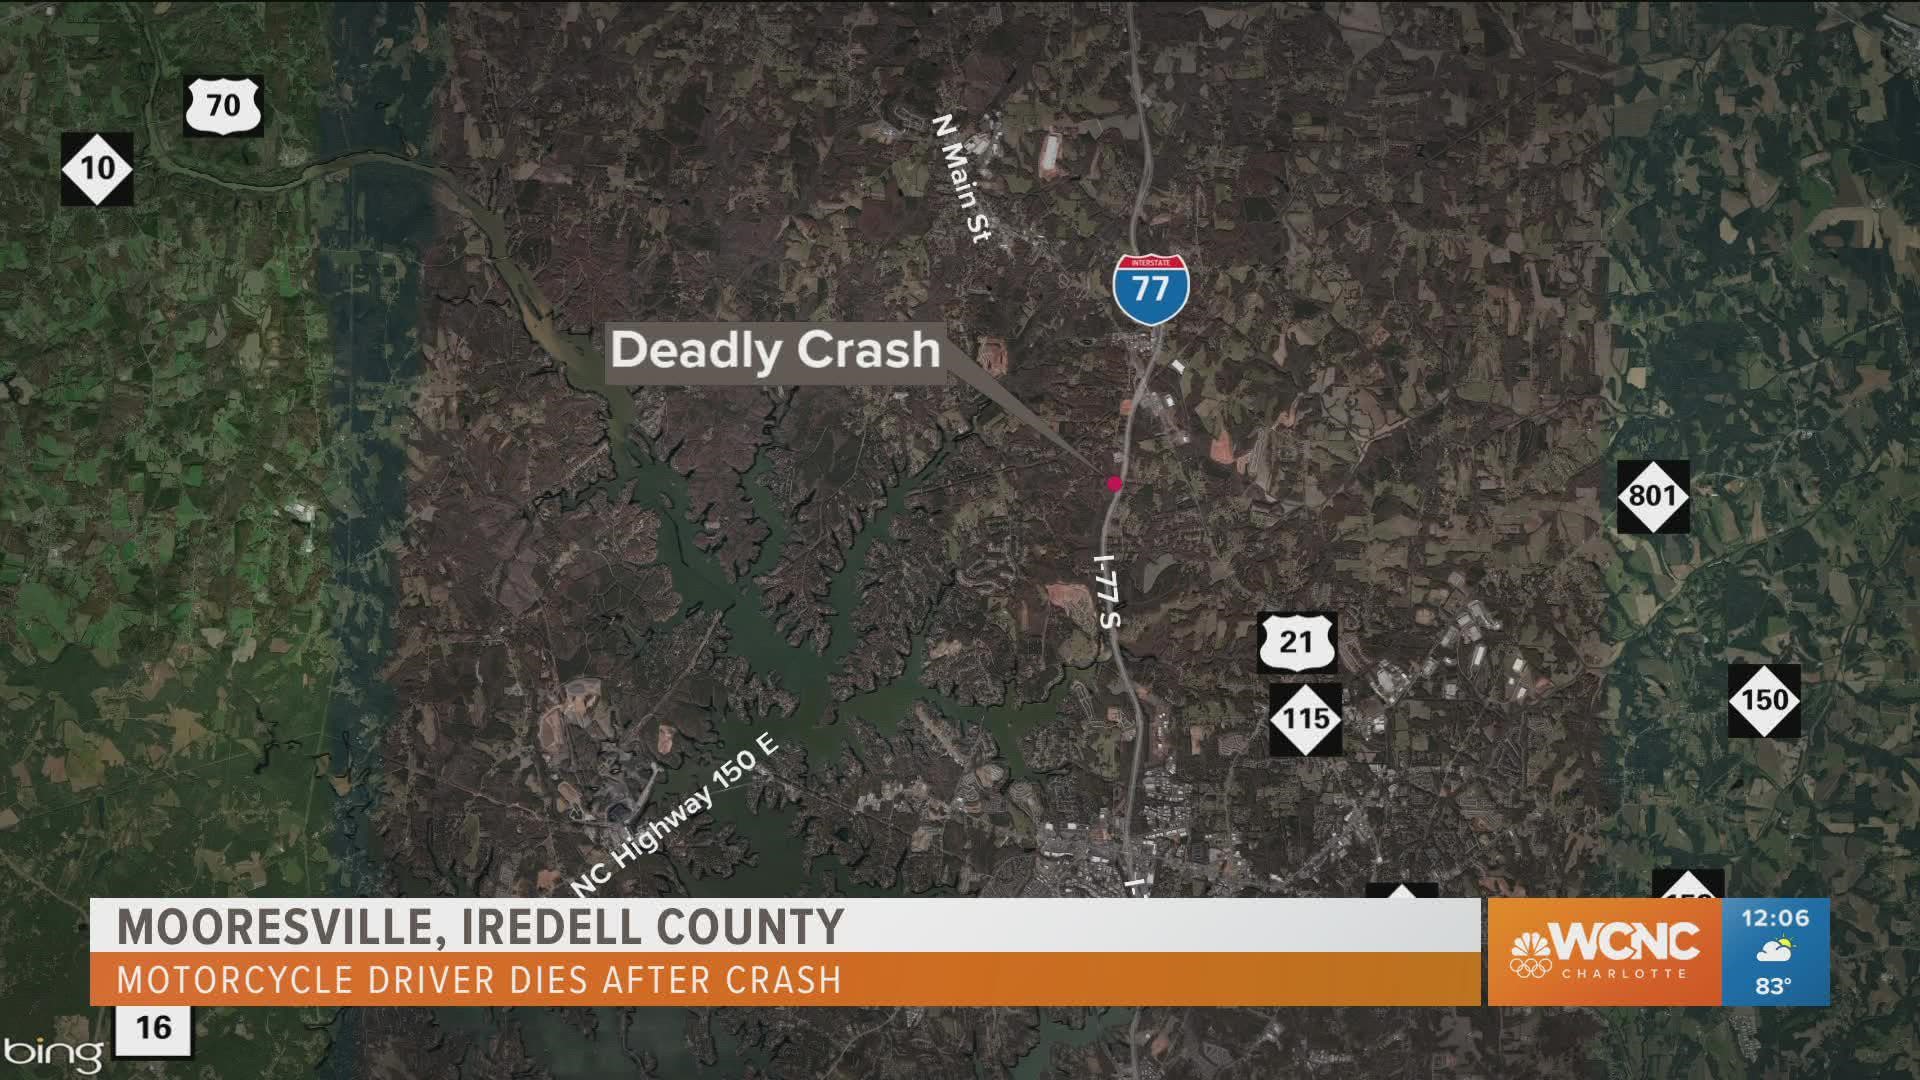 A 32-year-old Mooresville man was killed in a crash involving a motorcycle on I-77 early Tuesday, state troopers said.